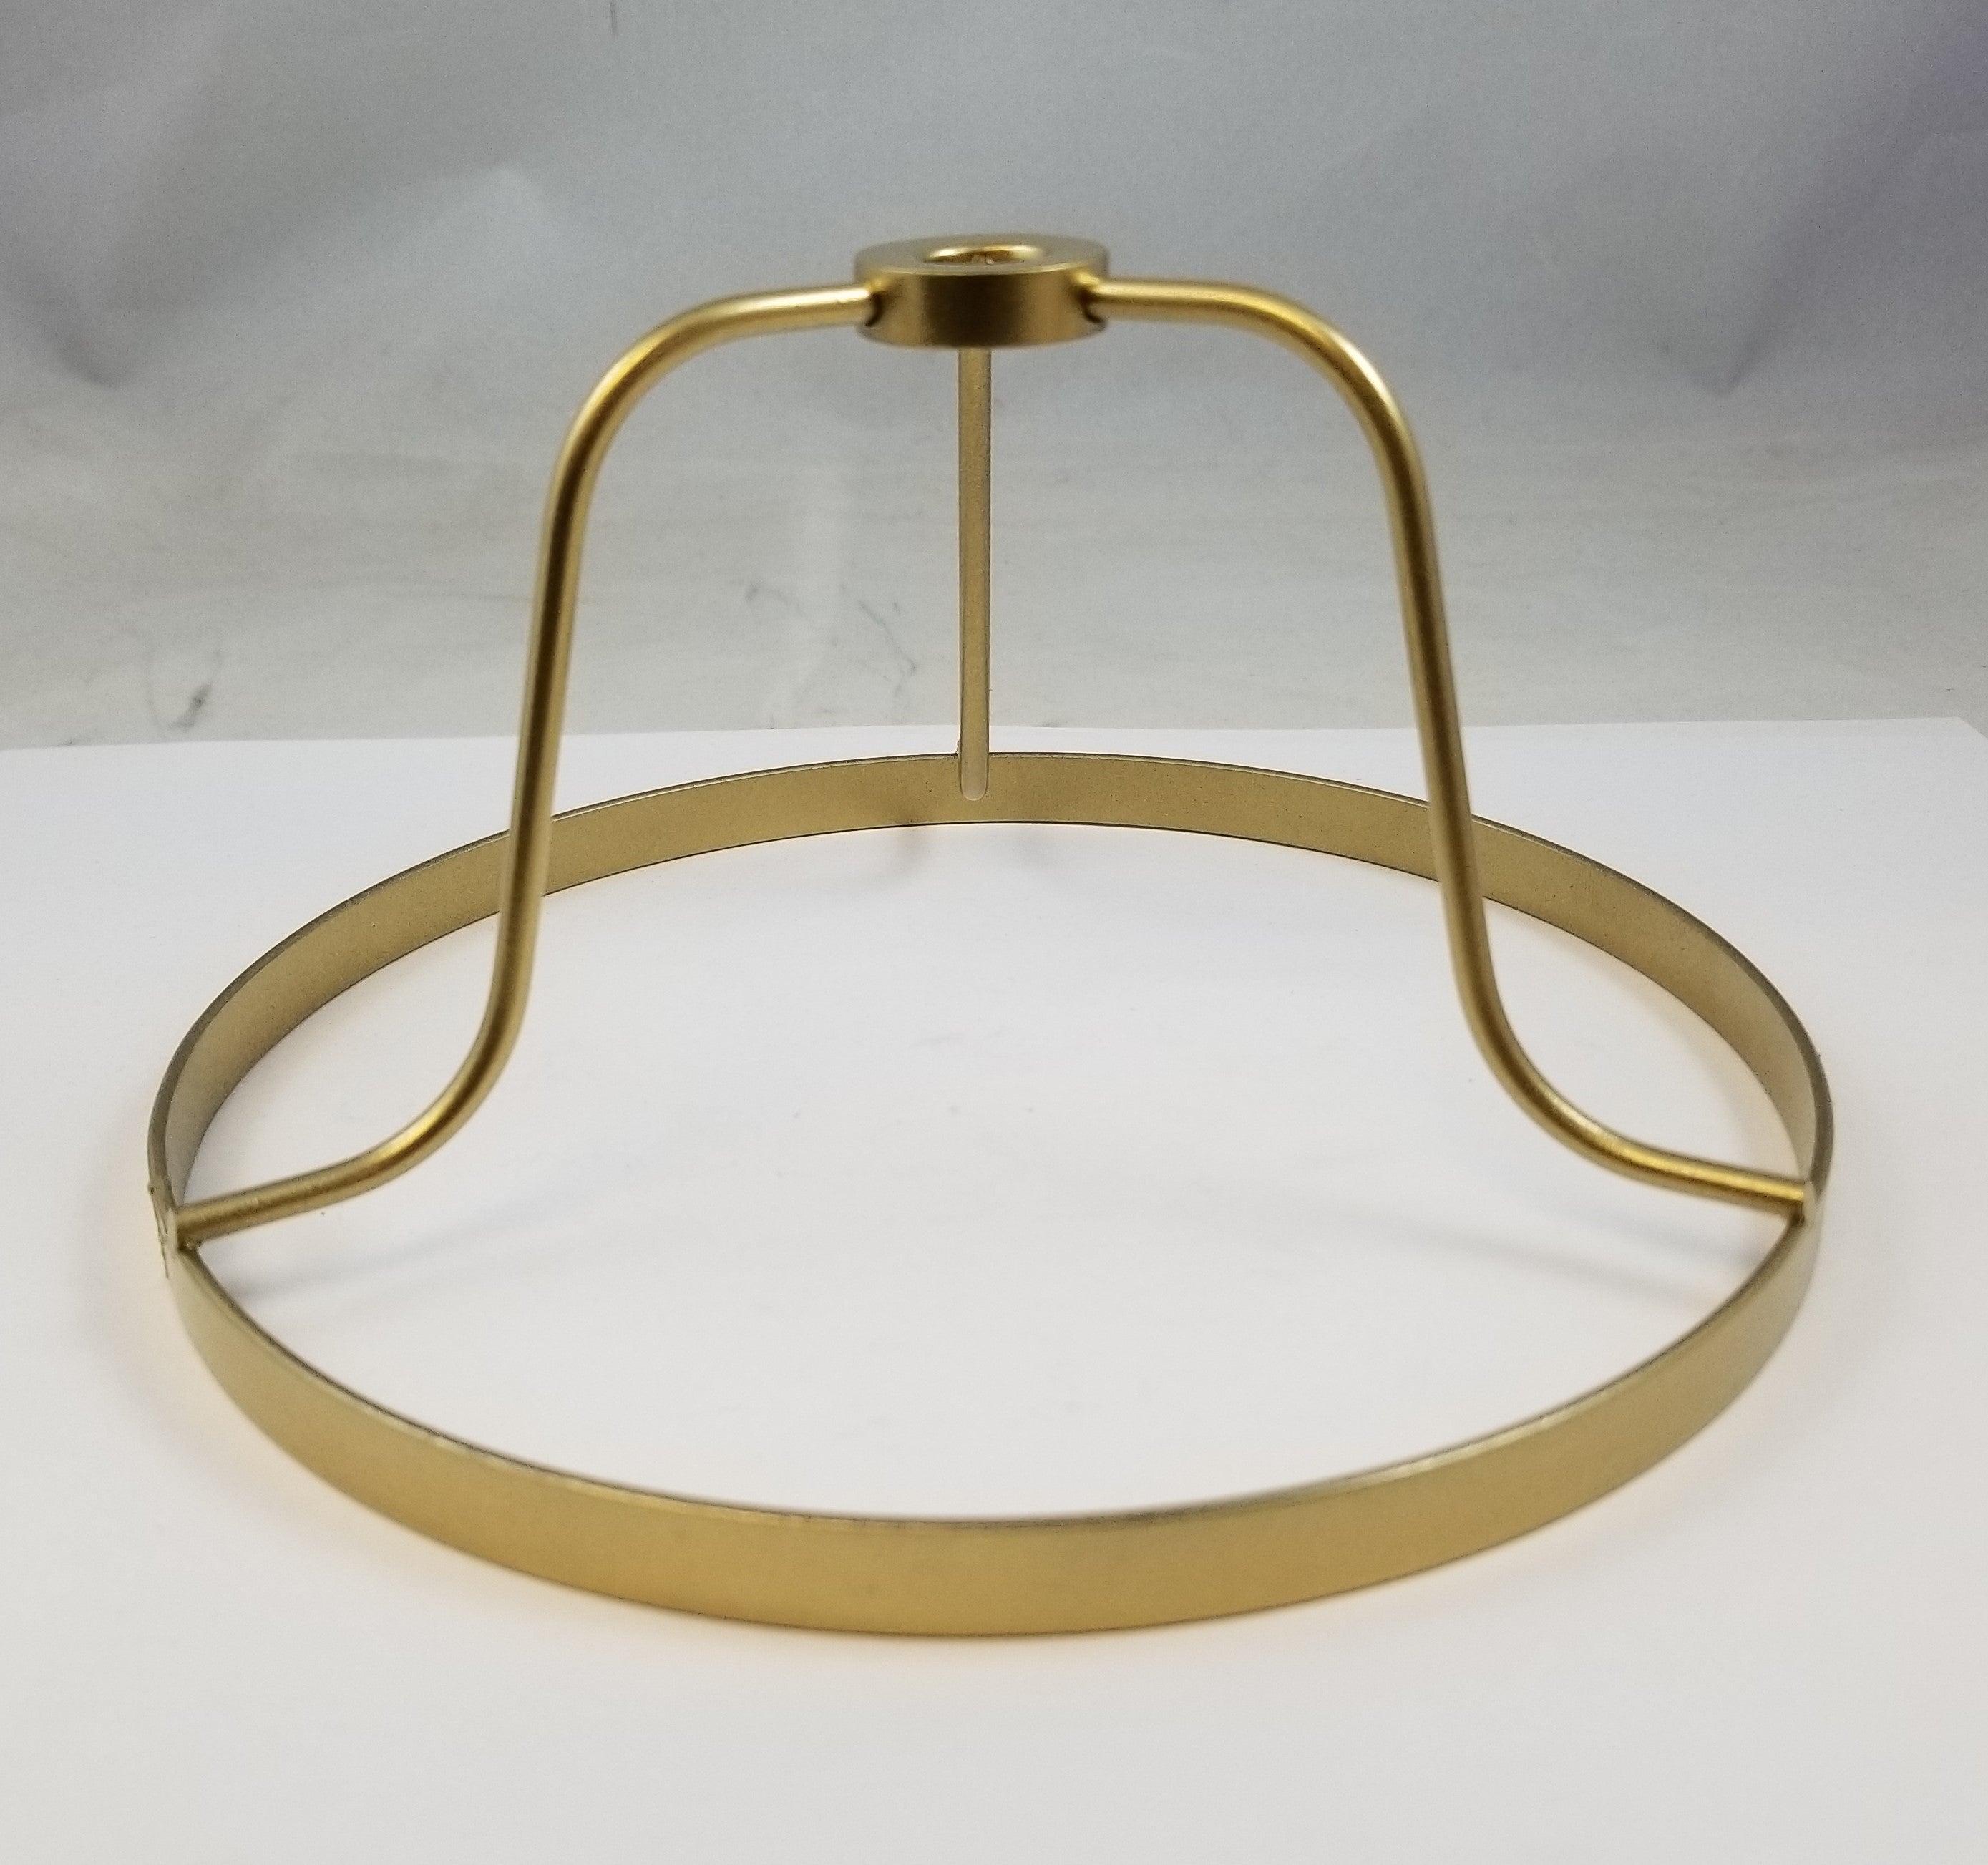 6" Brass Finish Student Shade Holder **LIMITED QUANTITY**